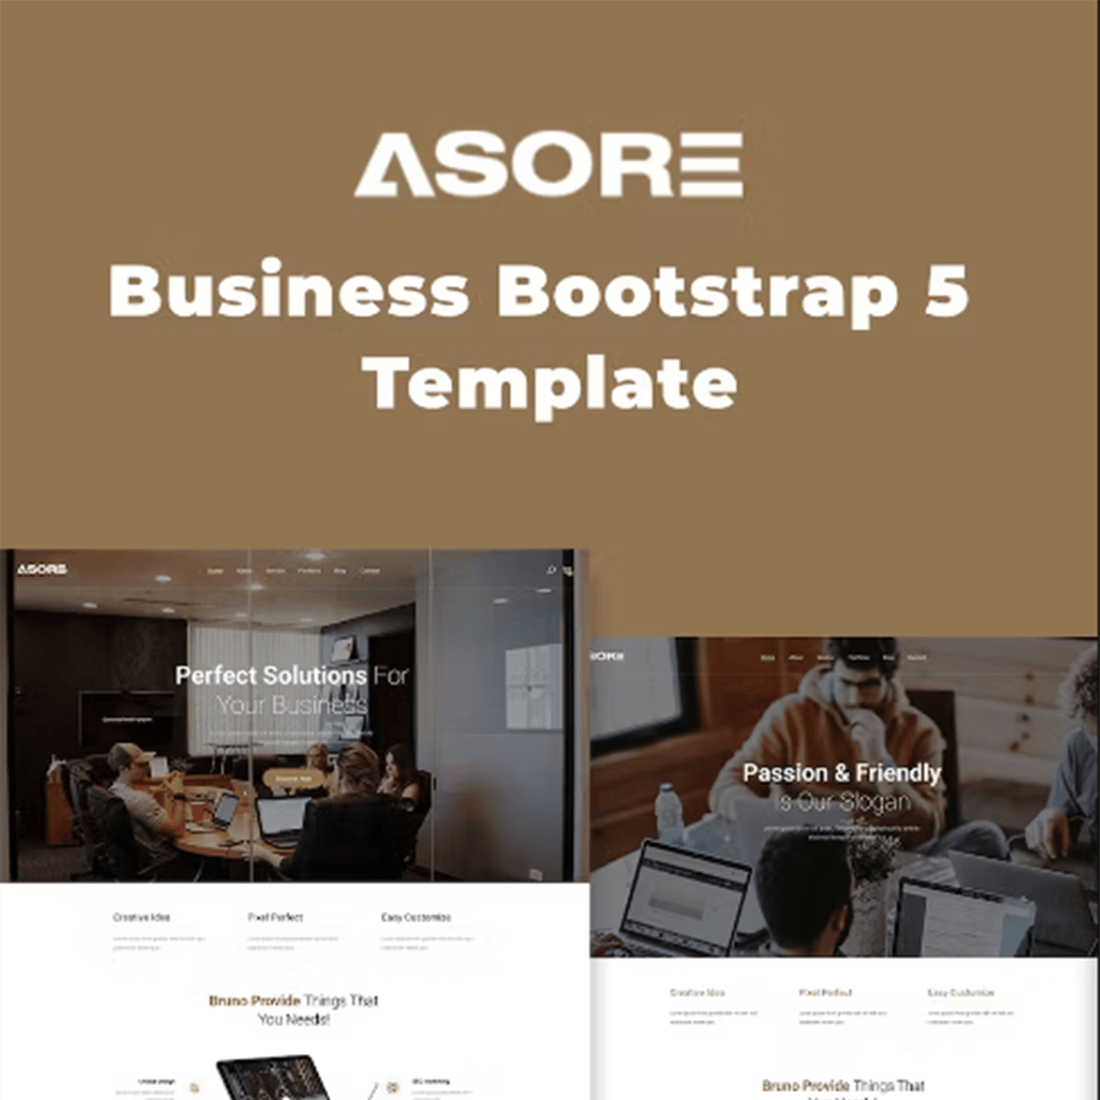 Free Asore Business Bootstrap 5 Website Template cover image.